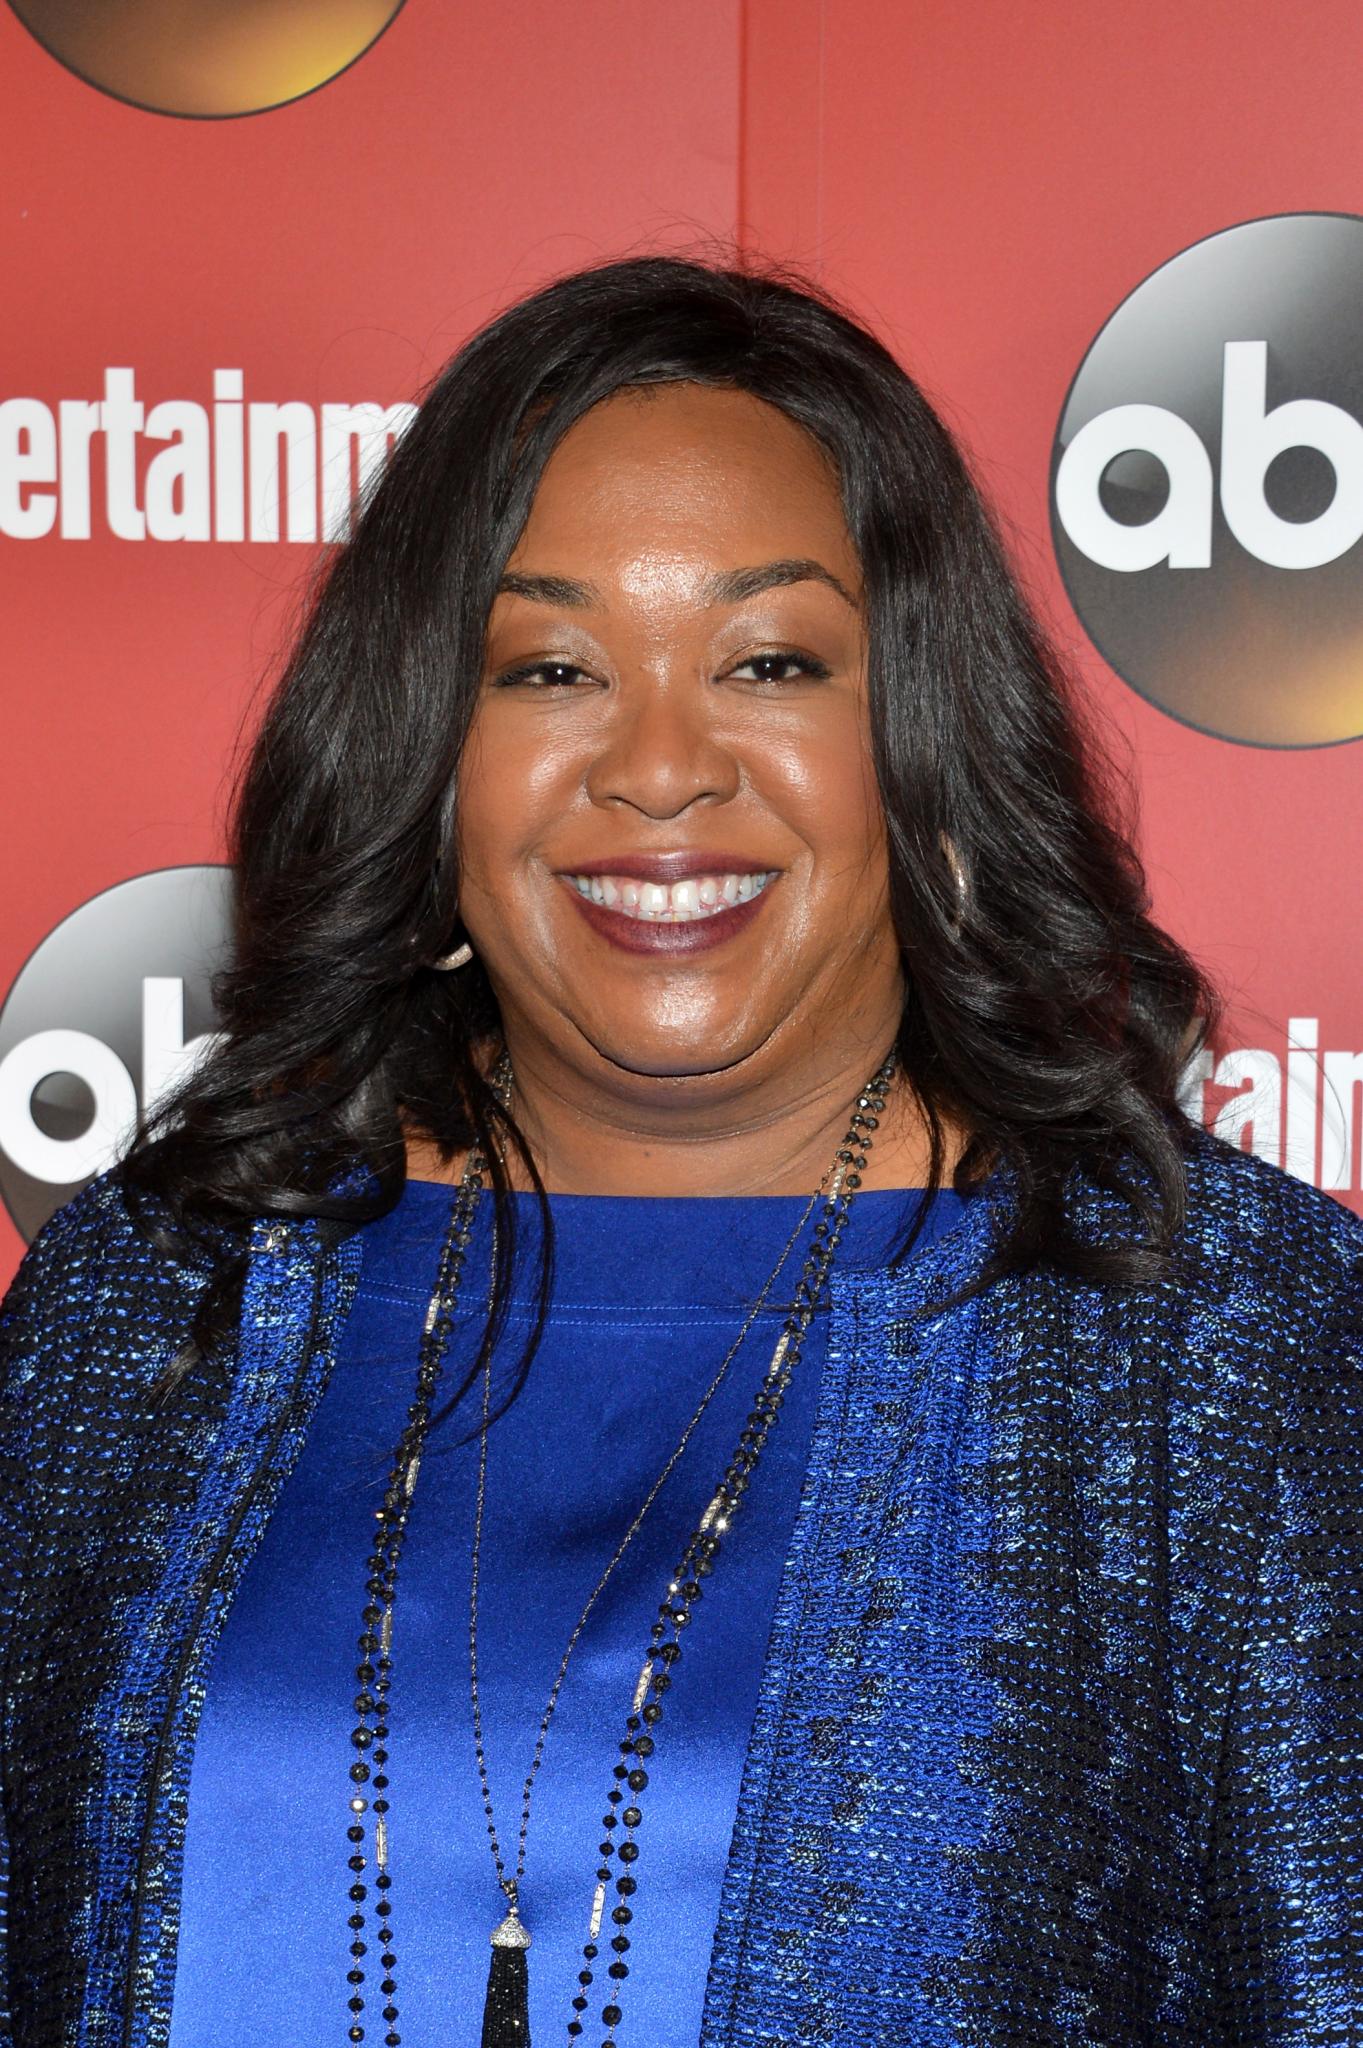 ABC Orders Third Shonda Rhimes Drama, 'How to Get Away With Murder'
